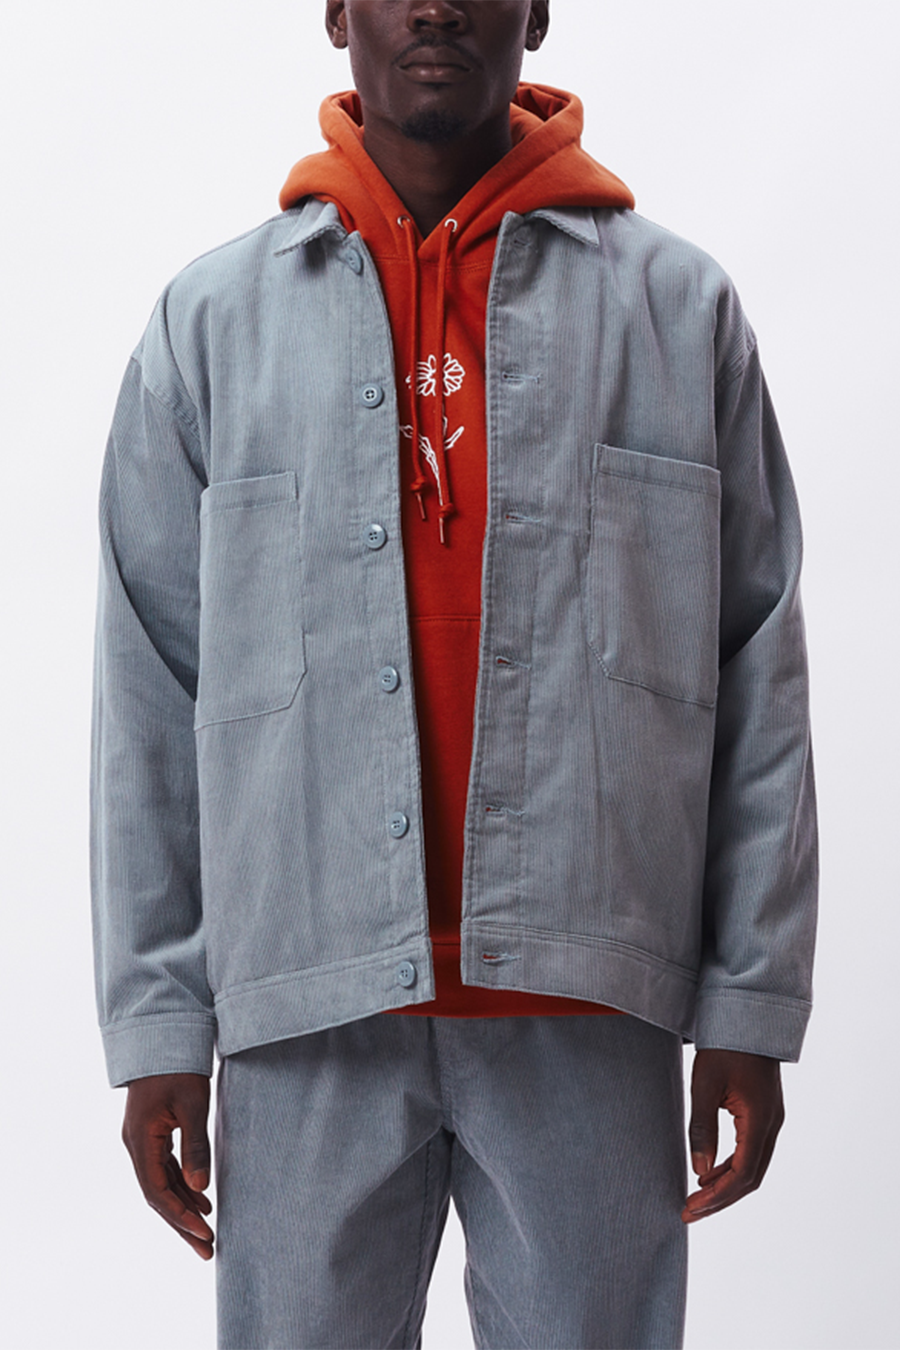 Marquee Shirt Jacket | Leaf - Main Image Number 1 of 2